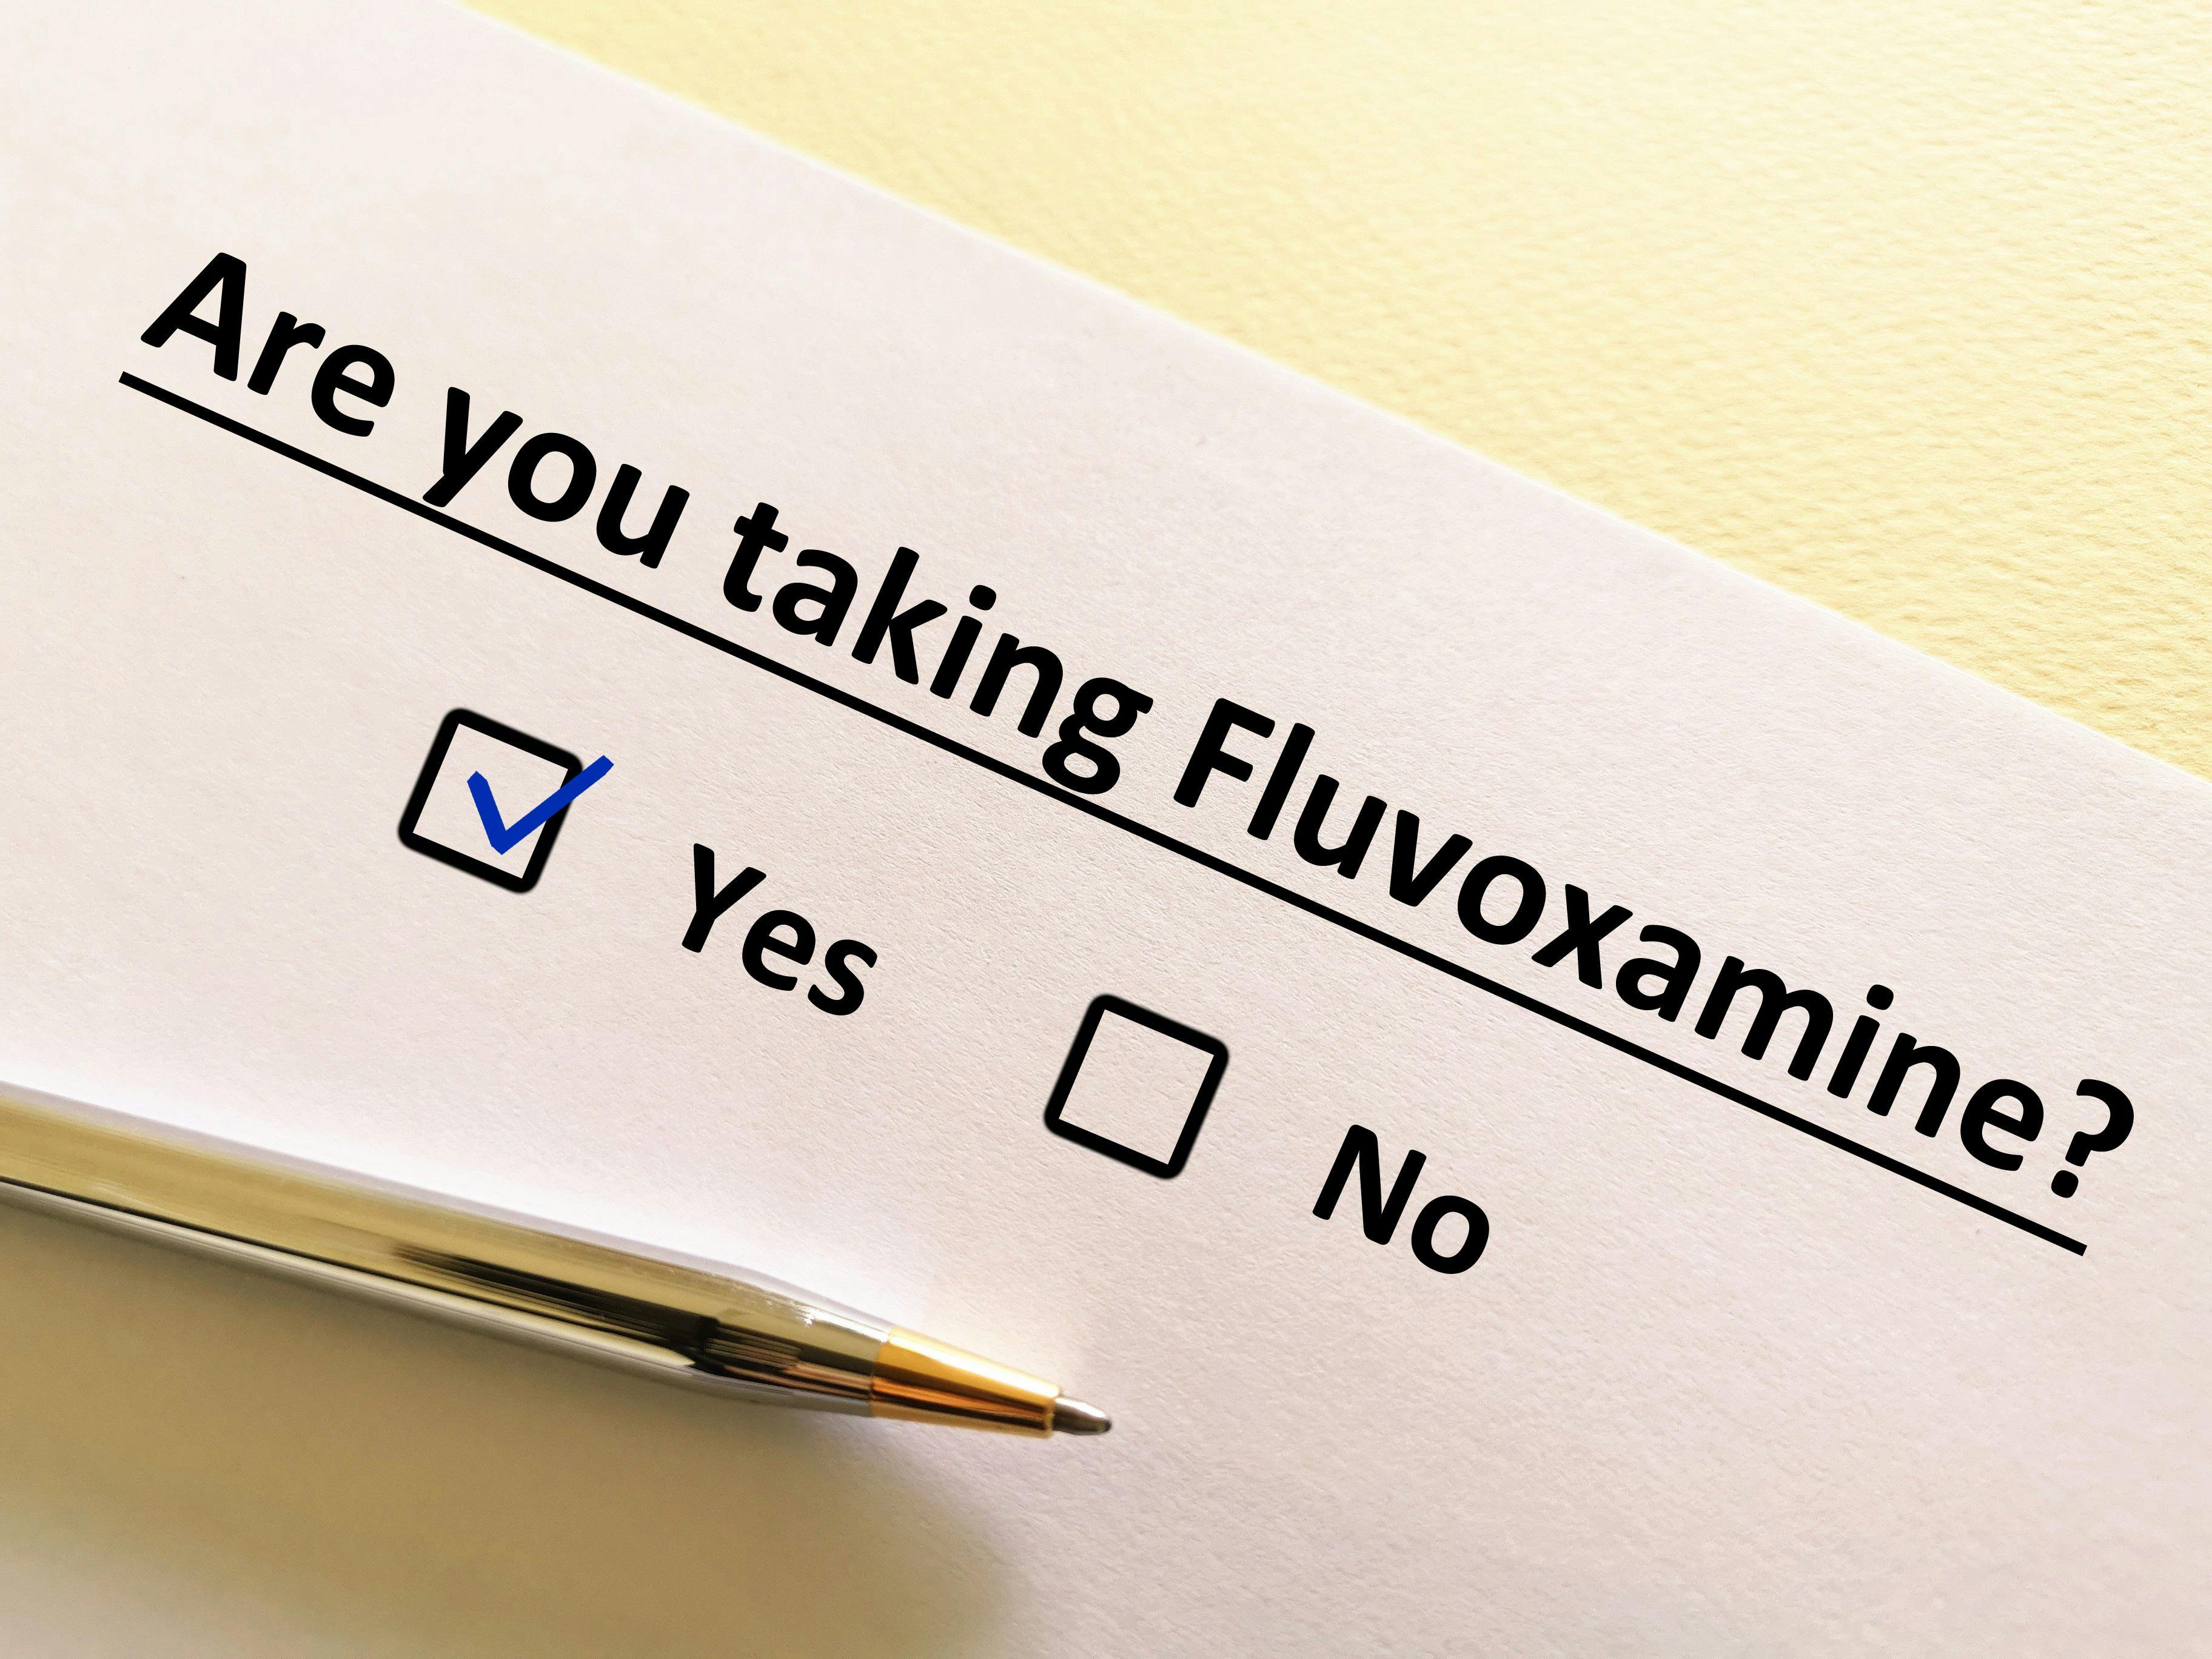 A systematic review of clinical trials found a high probability that fluvoxamine prevented COVID-19 hospitalizations in outpatient settings.